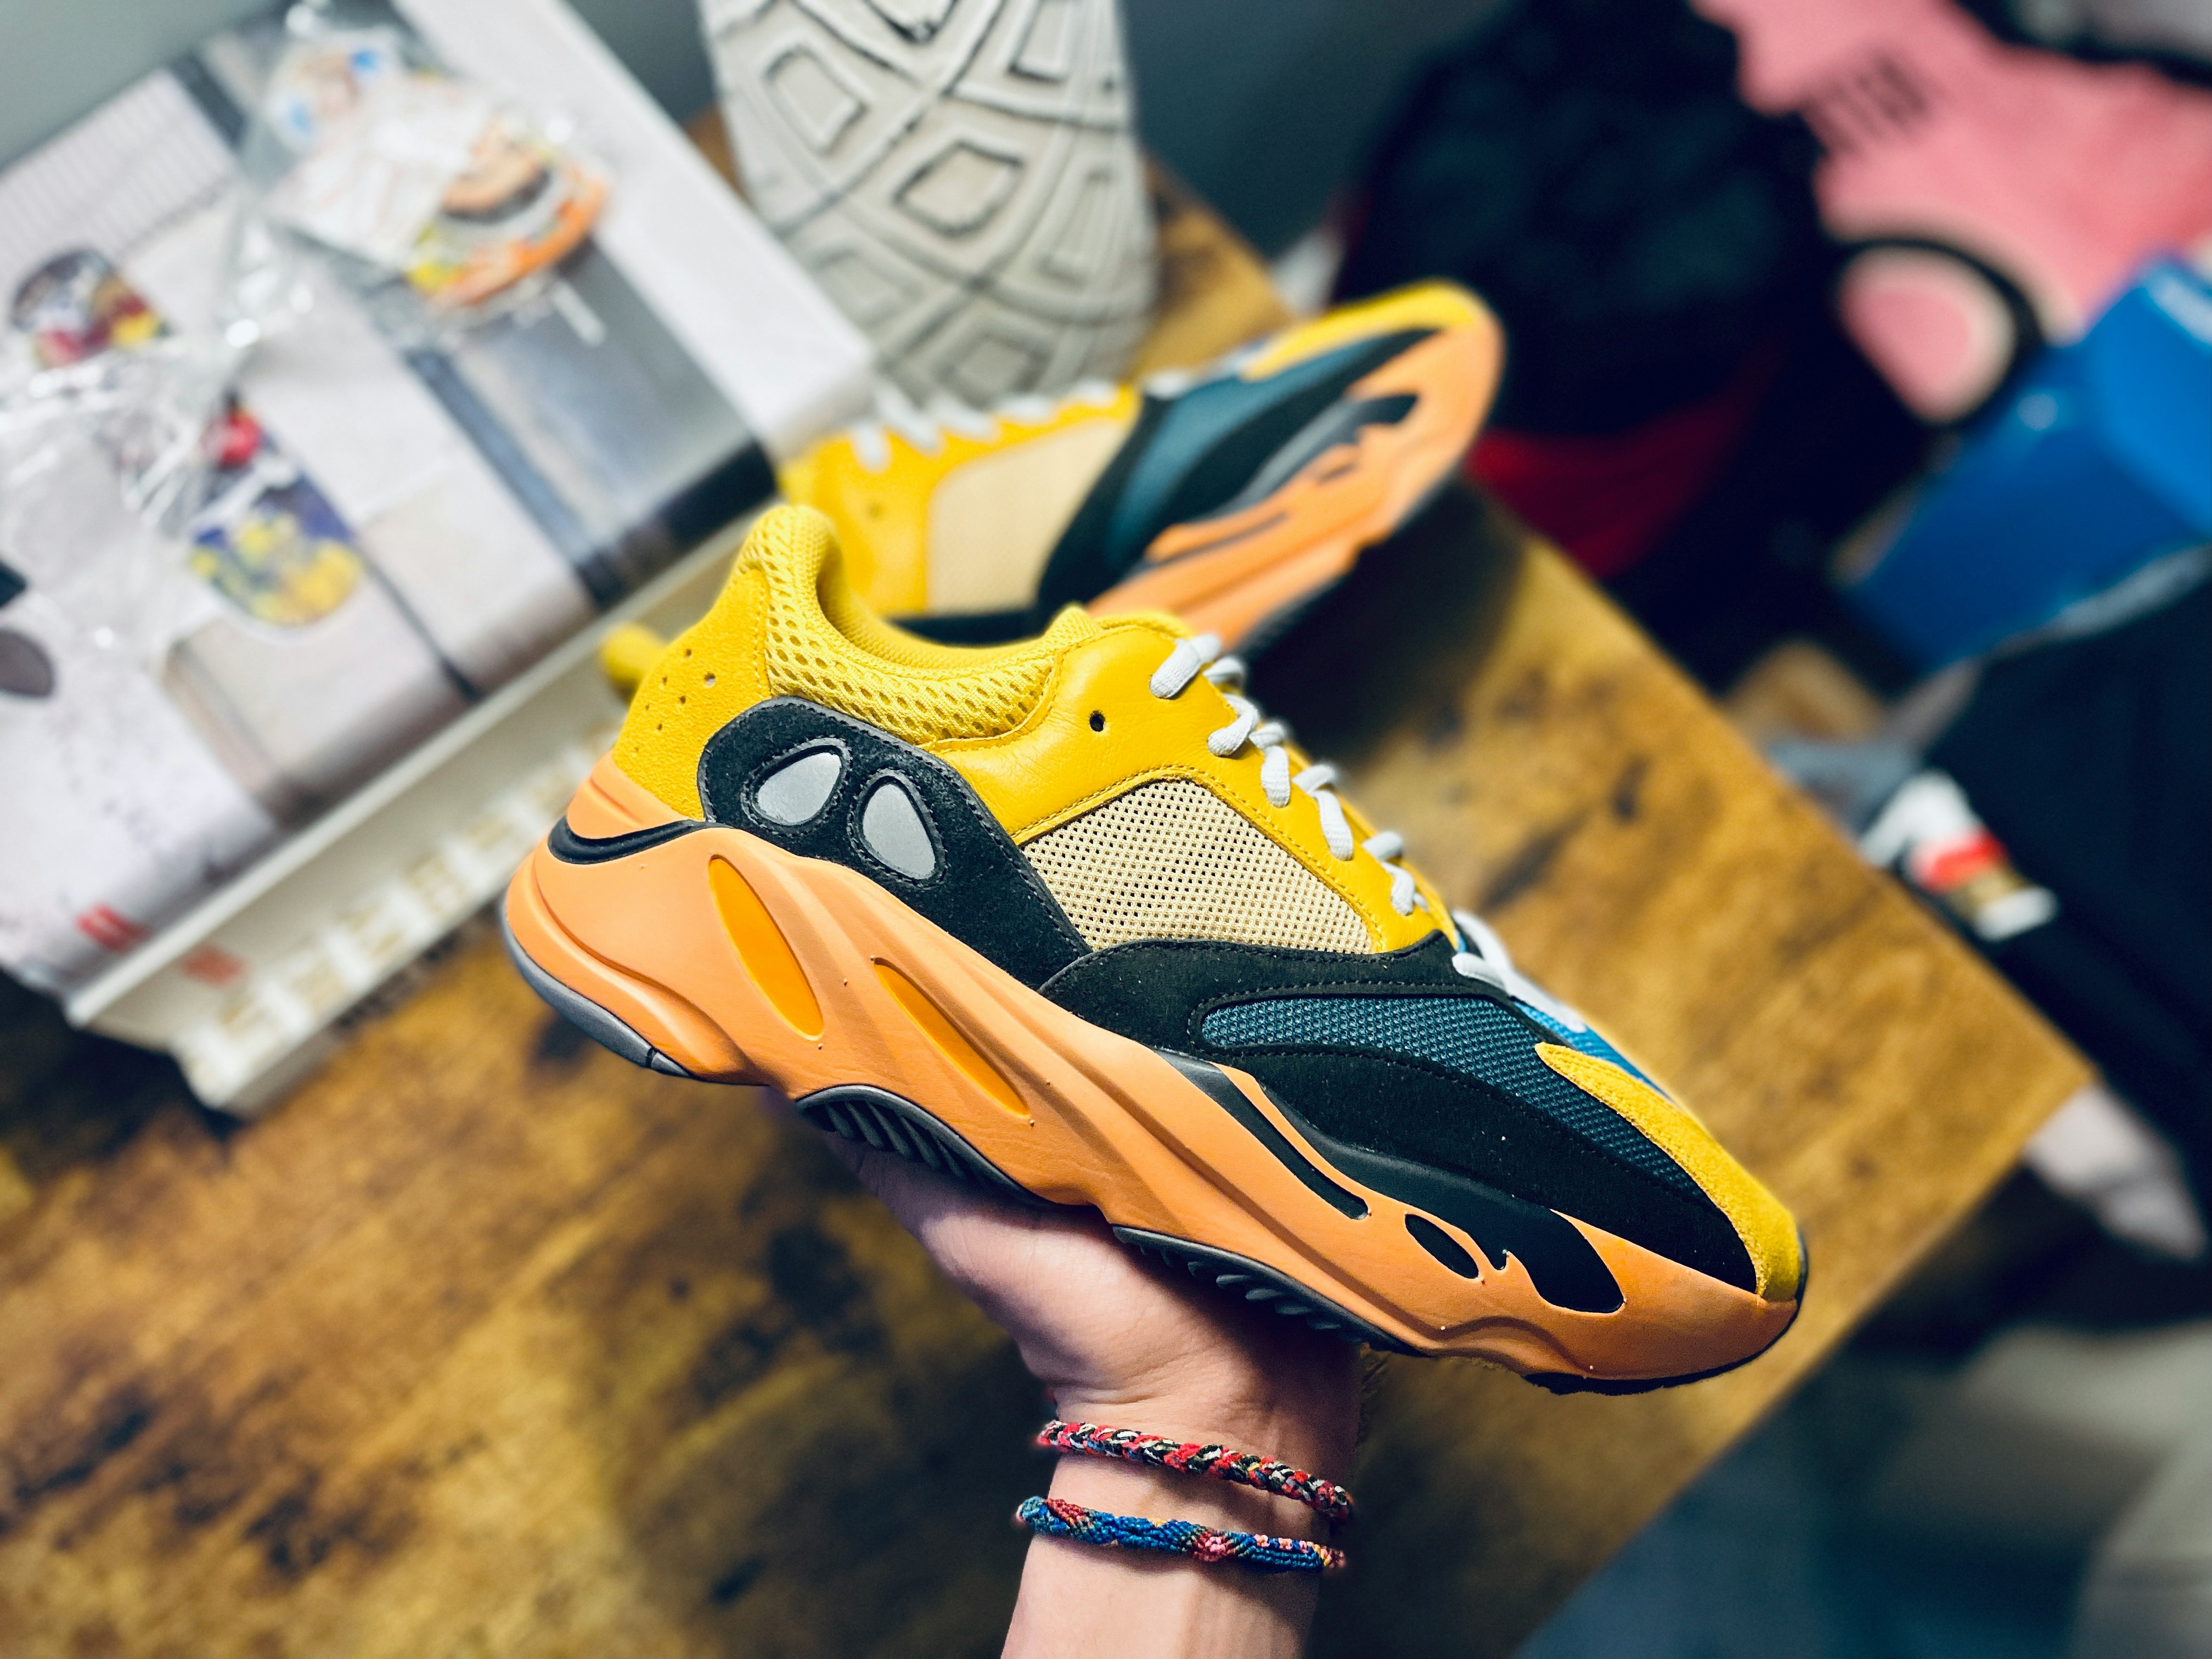 Yeezy 700 'Sun': A classic Kanye sneaker gets brighter (and cheaper)